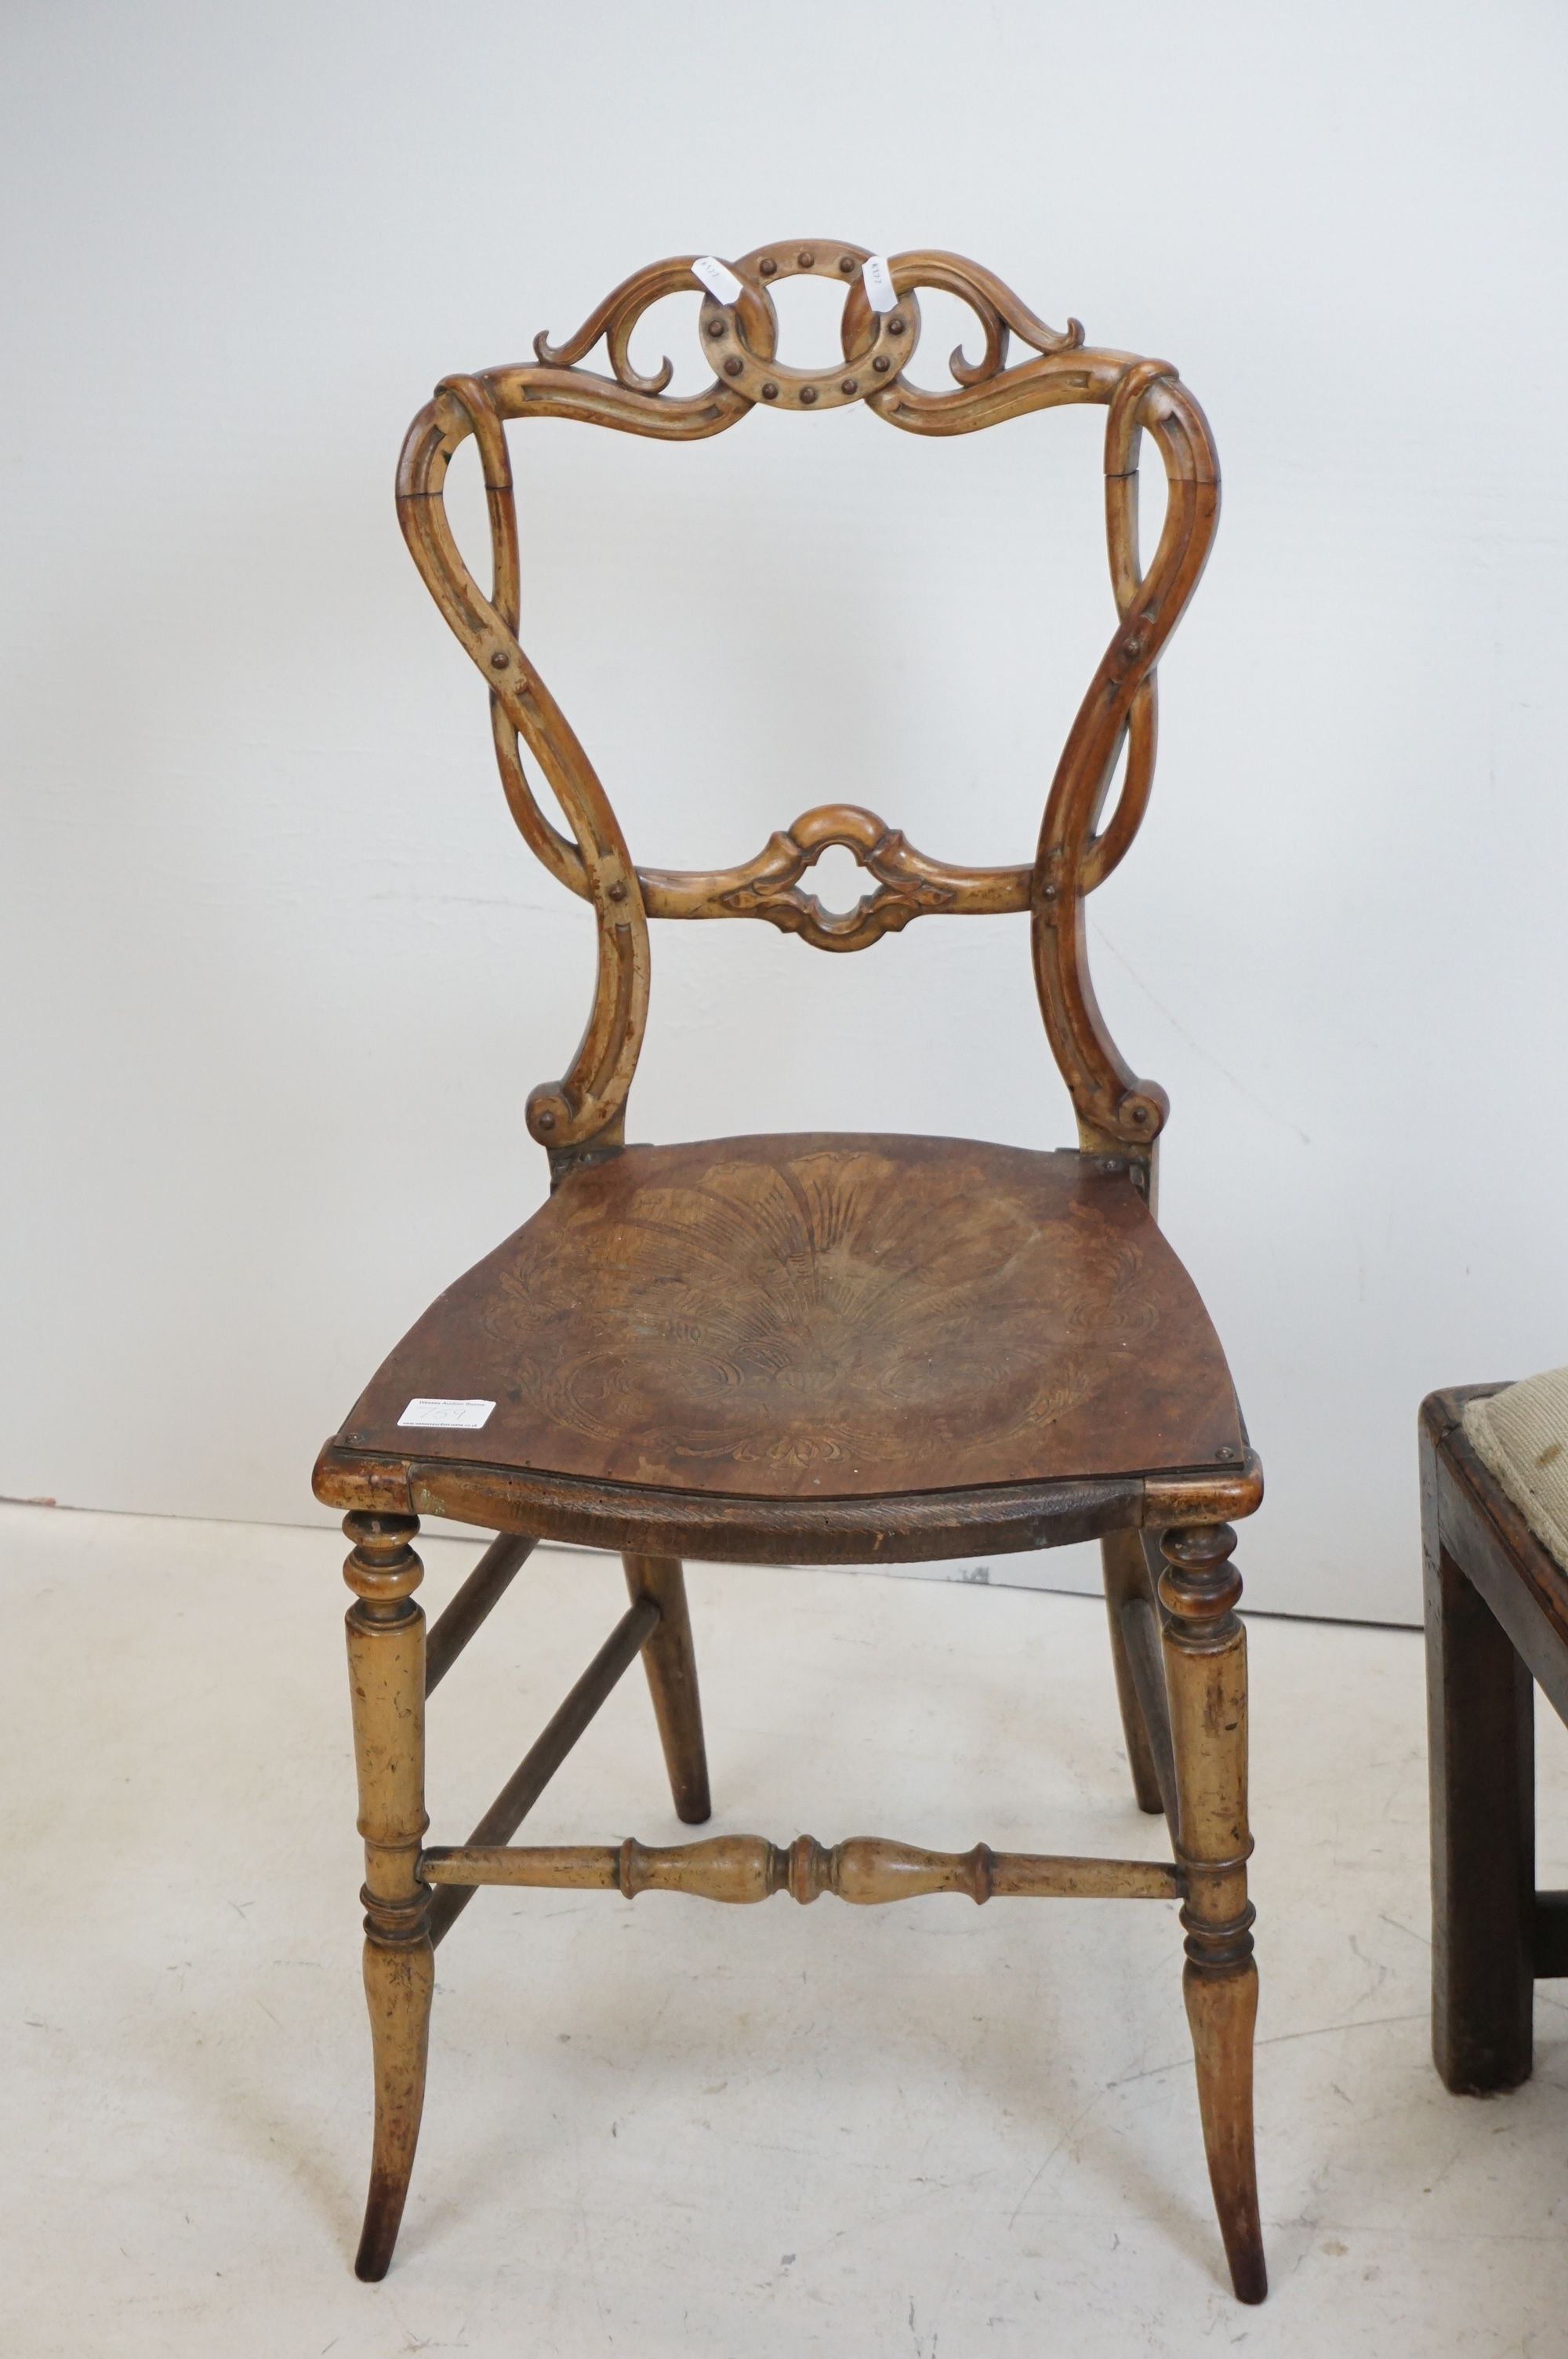 Victorian Bedroom Chair with entwined ornately carved back together with a Victorian Balloon Back - Image 3 of 6